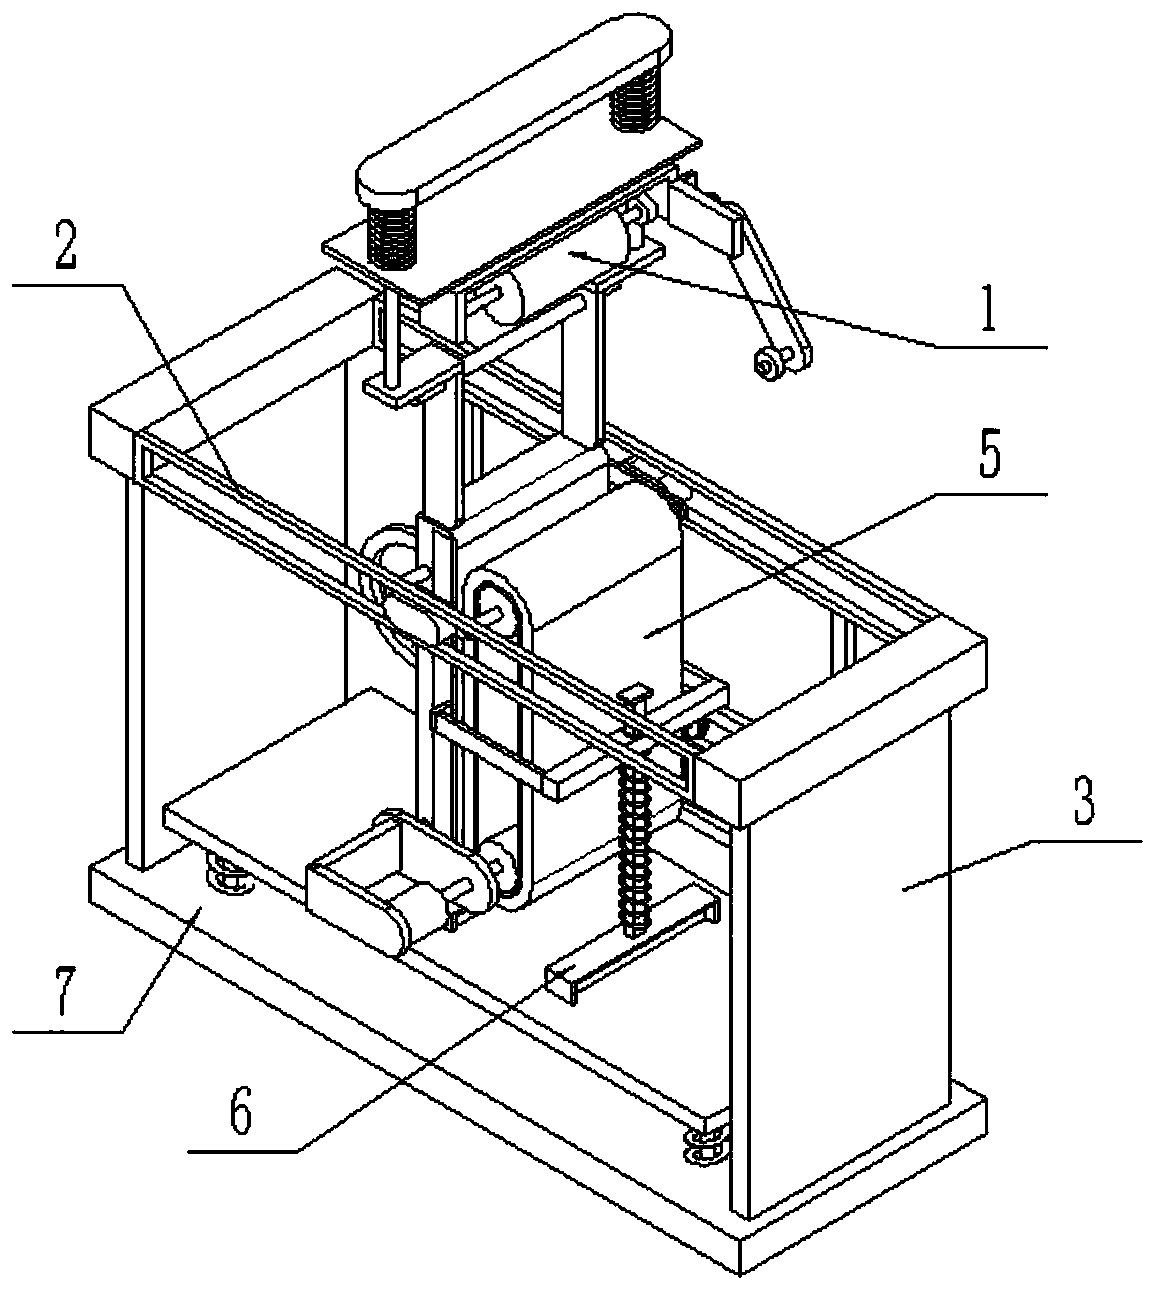 Unwinding and stacking device for roll cloth with anti-loosening